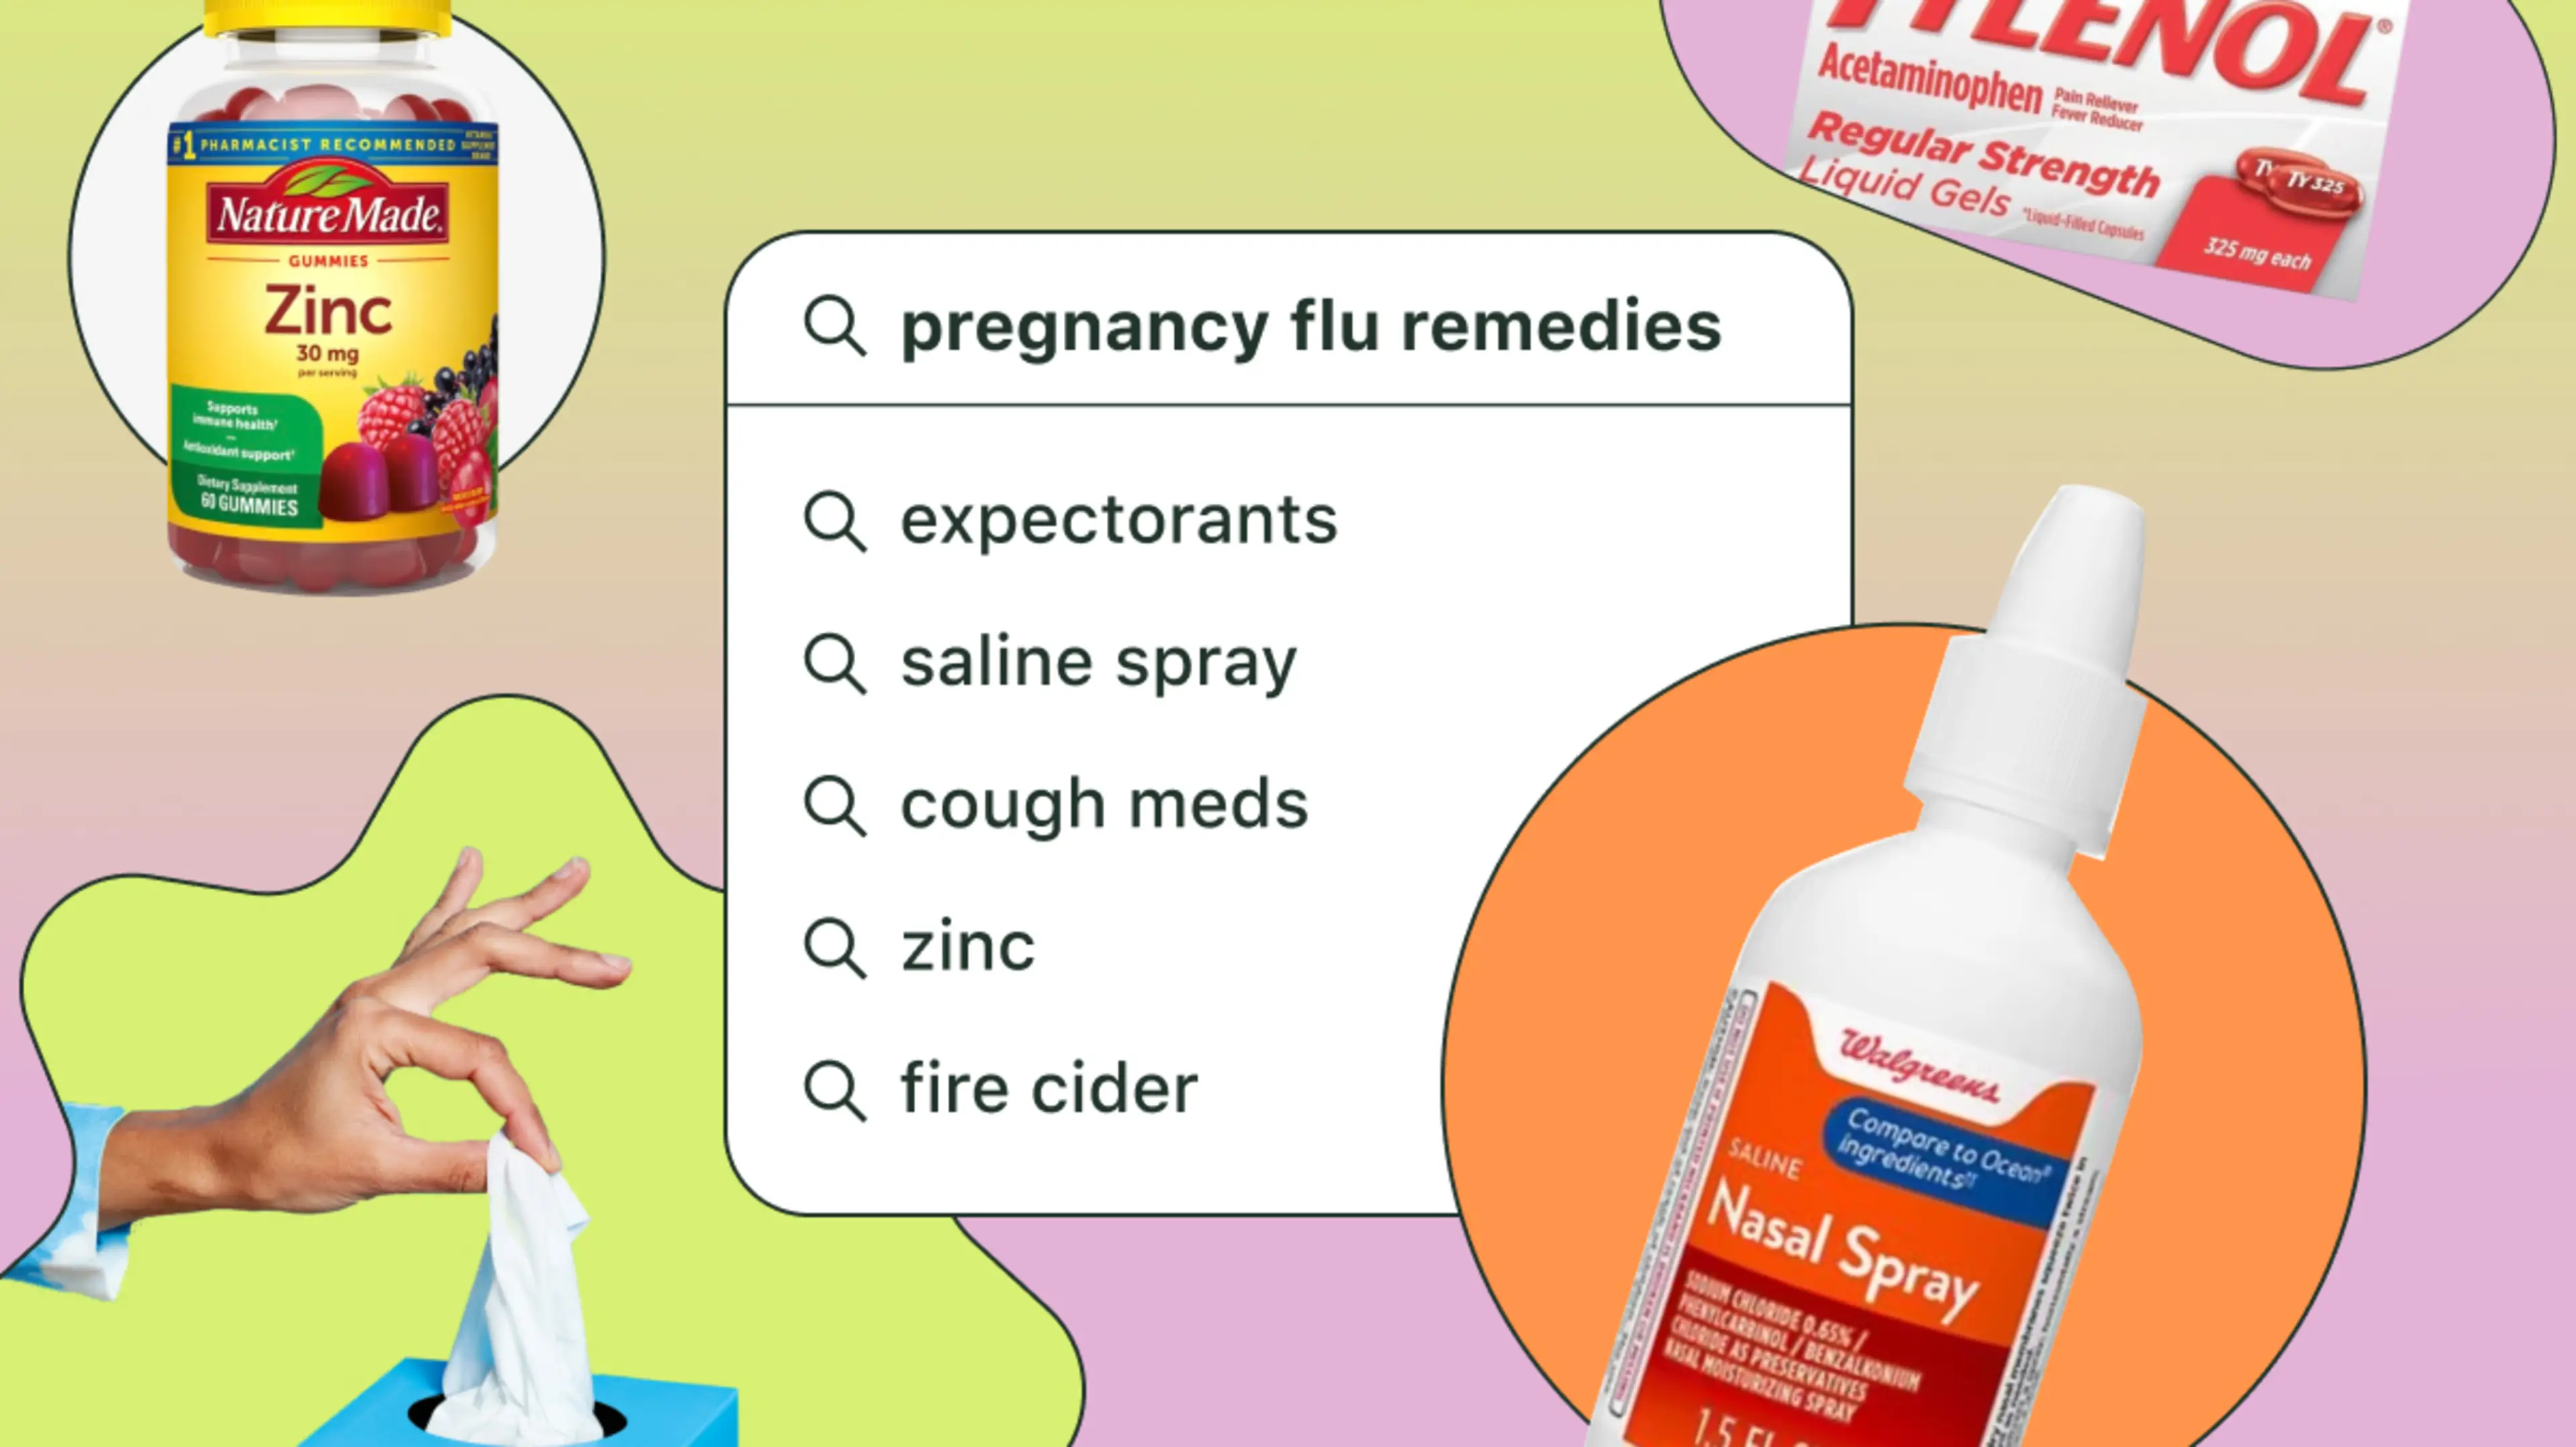 Your Definitive Guide to Pregnancy-Safe Cold & Flu Remedies - article body